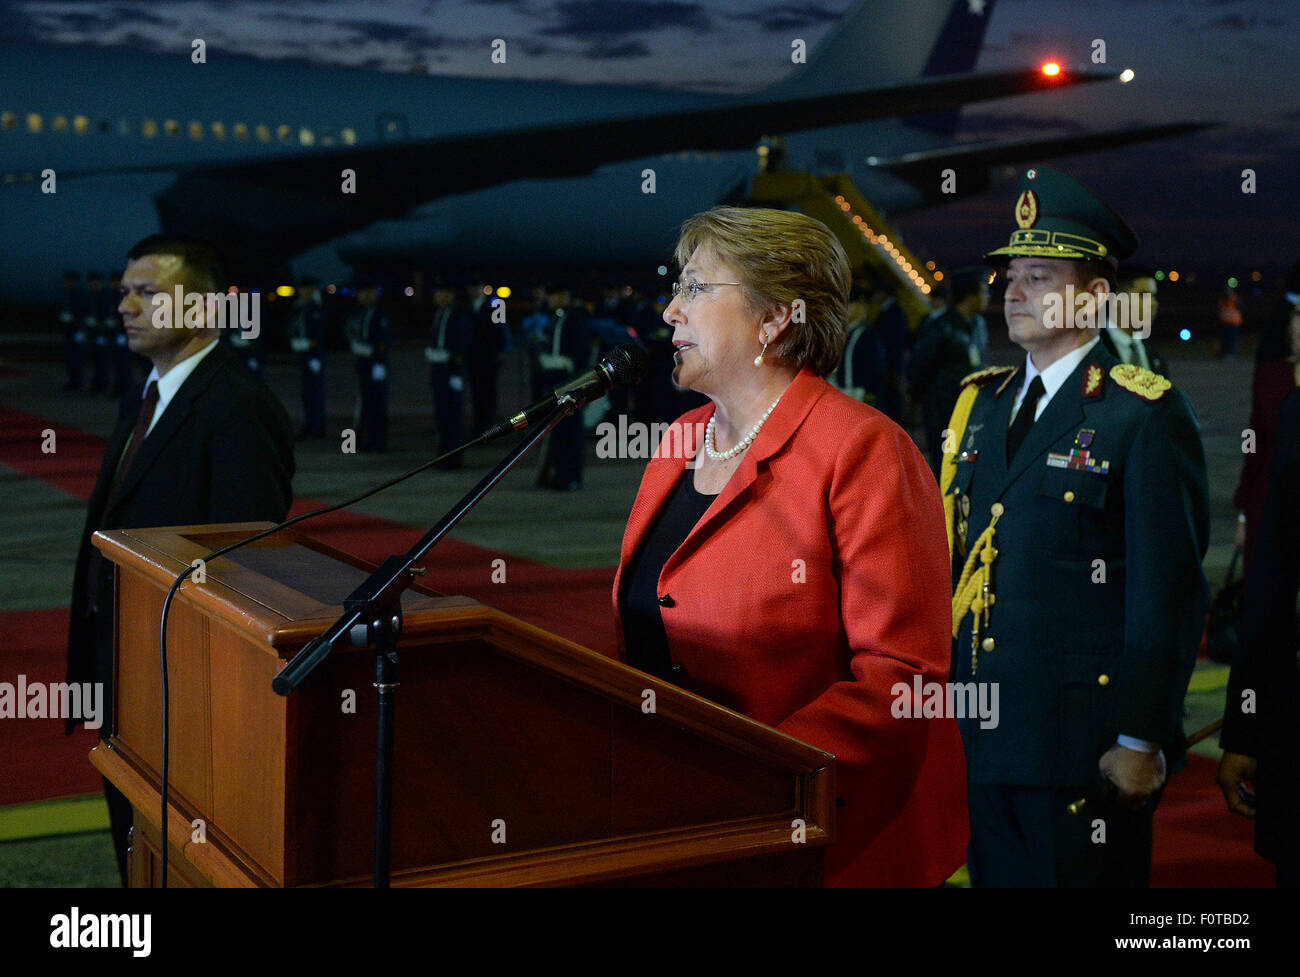 Asuncion. 20th Aug, 2015. Image provided by Chile's Presidency shows Chilean President Michelle Bachelet speaks after arriving at Silvio Pettirossi International Airport in Asuncion Aug. 20, 2015 for an officil visit to Paraguay. Credit:  Alez Ibanez/Chile's Presidency/Xinhua/Alamy Live News Stock Photo